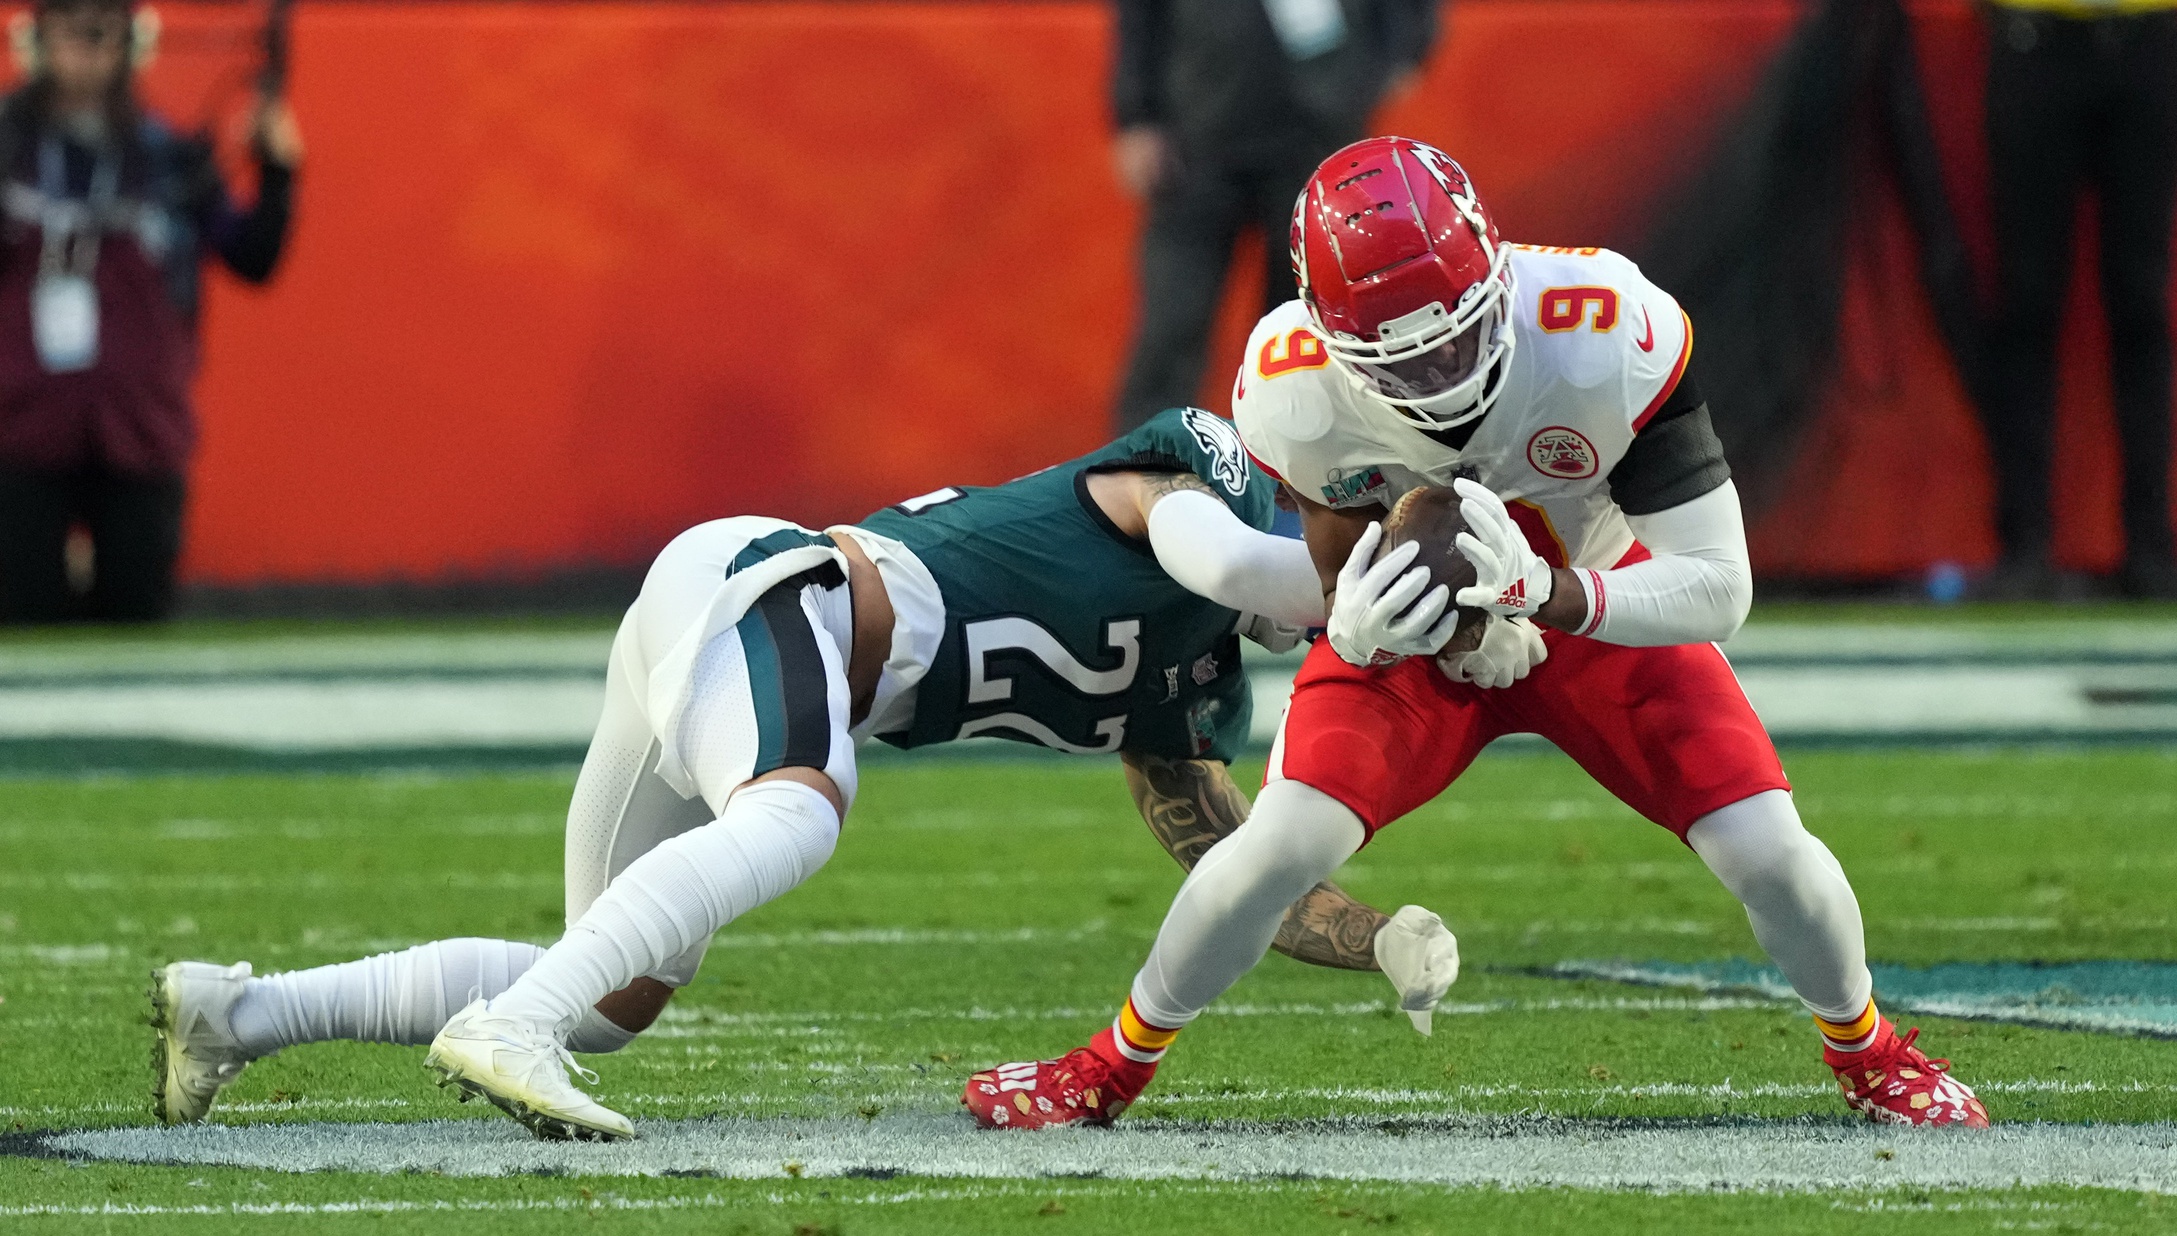 Eagles lost Super Bowl to KC long before controversial penalty call